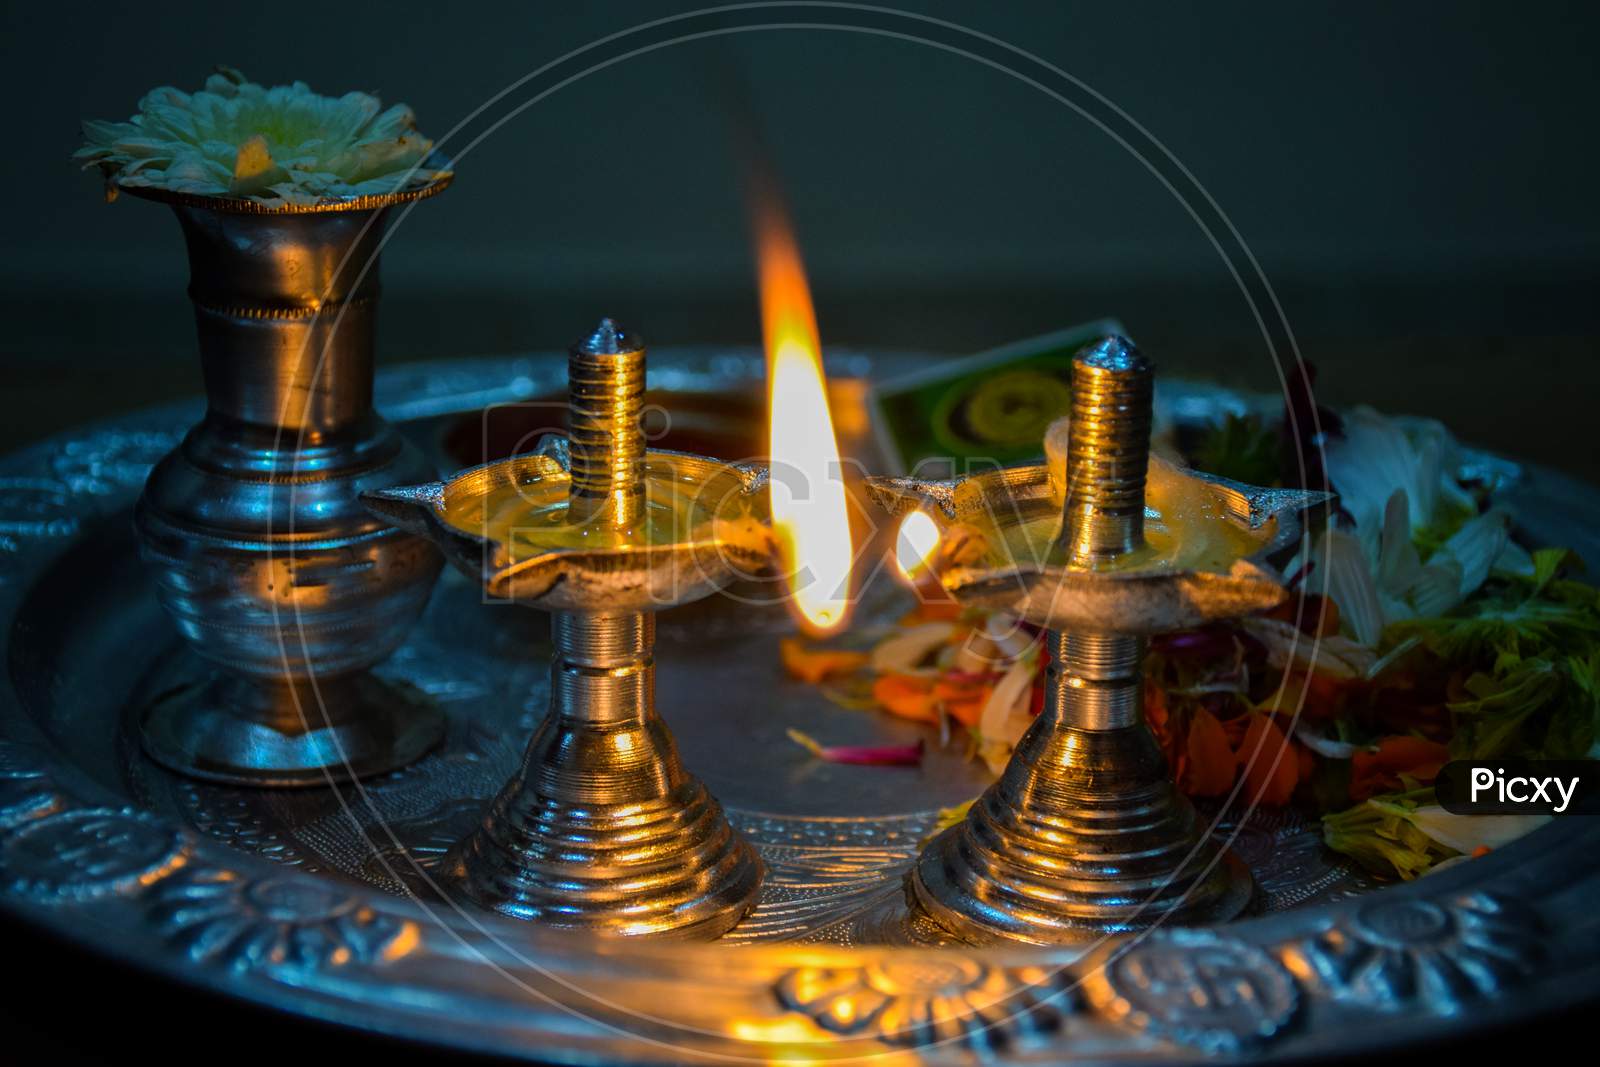 Beautiful Silver Old Lamp And Pooja Thali Decorated For Worshiping God.